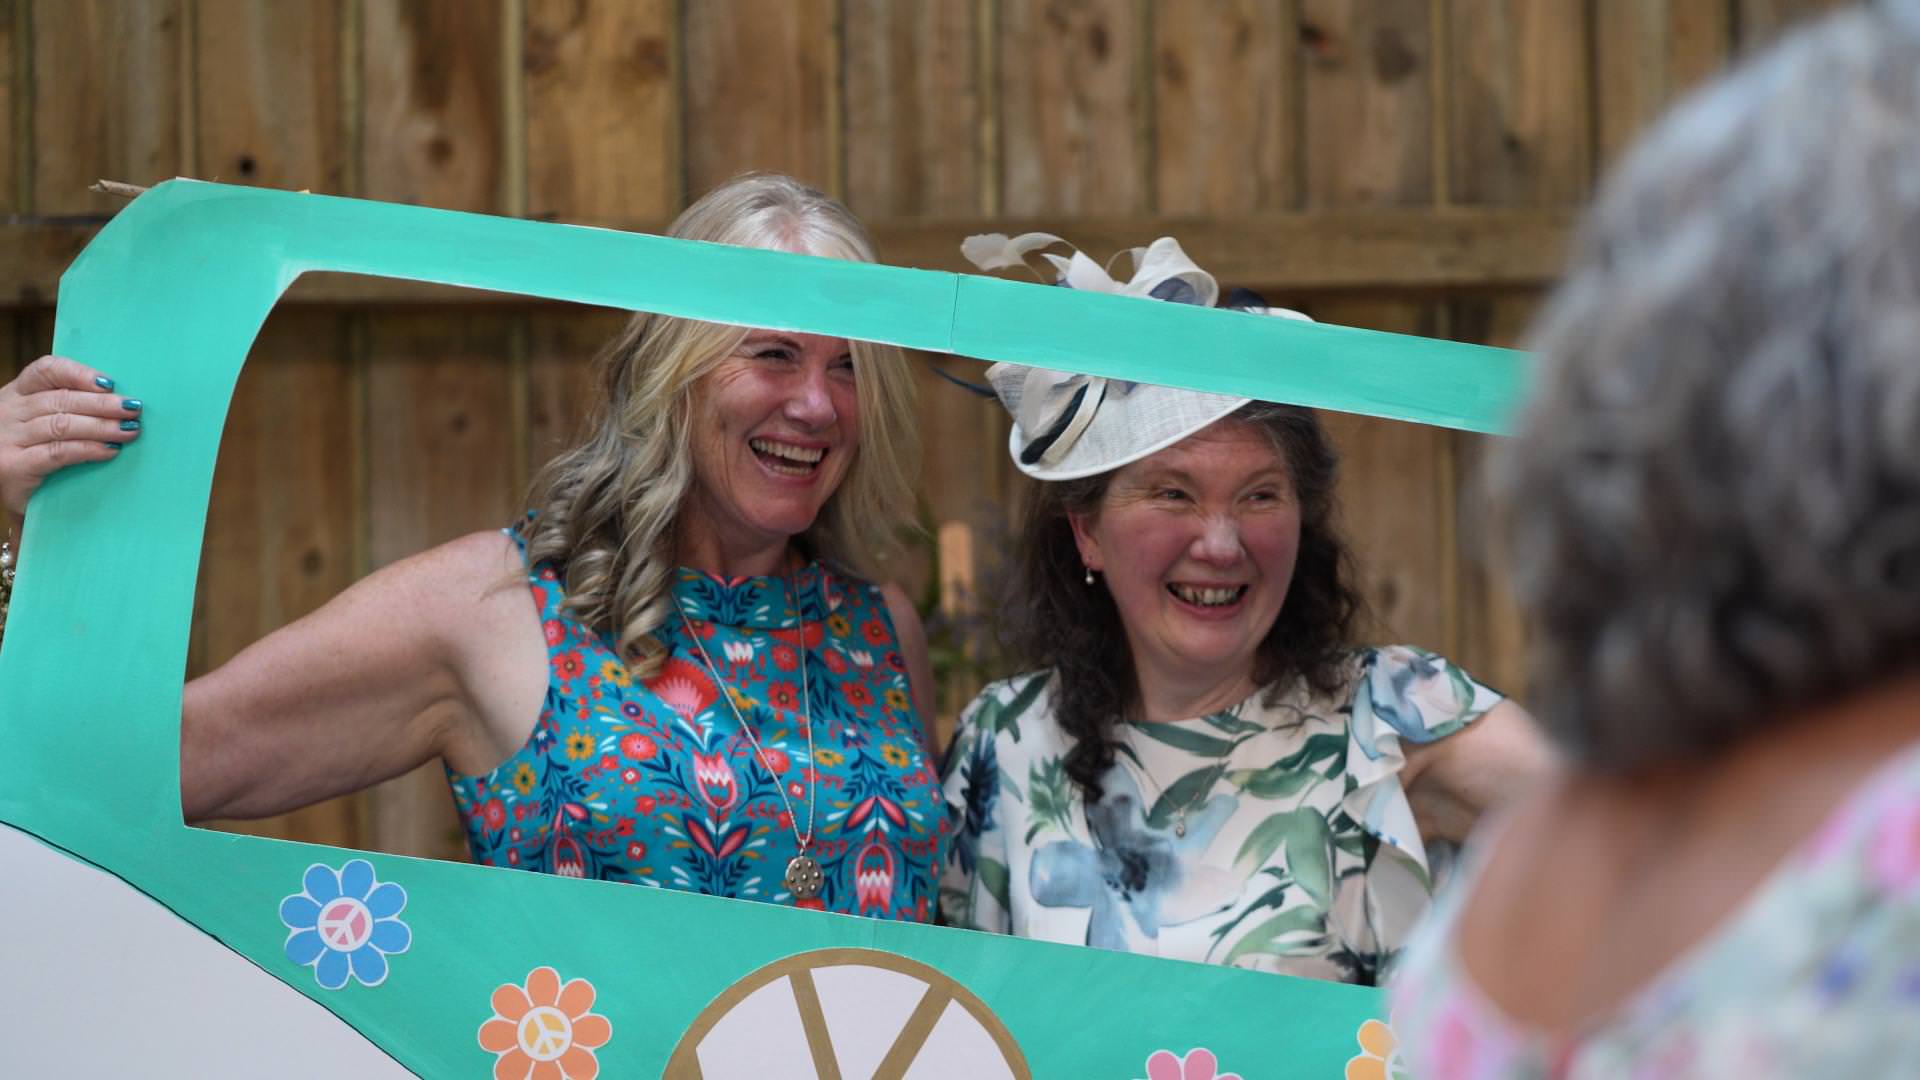 guests laughing with camper van photobooth